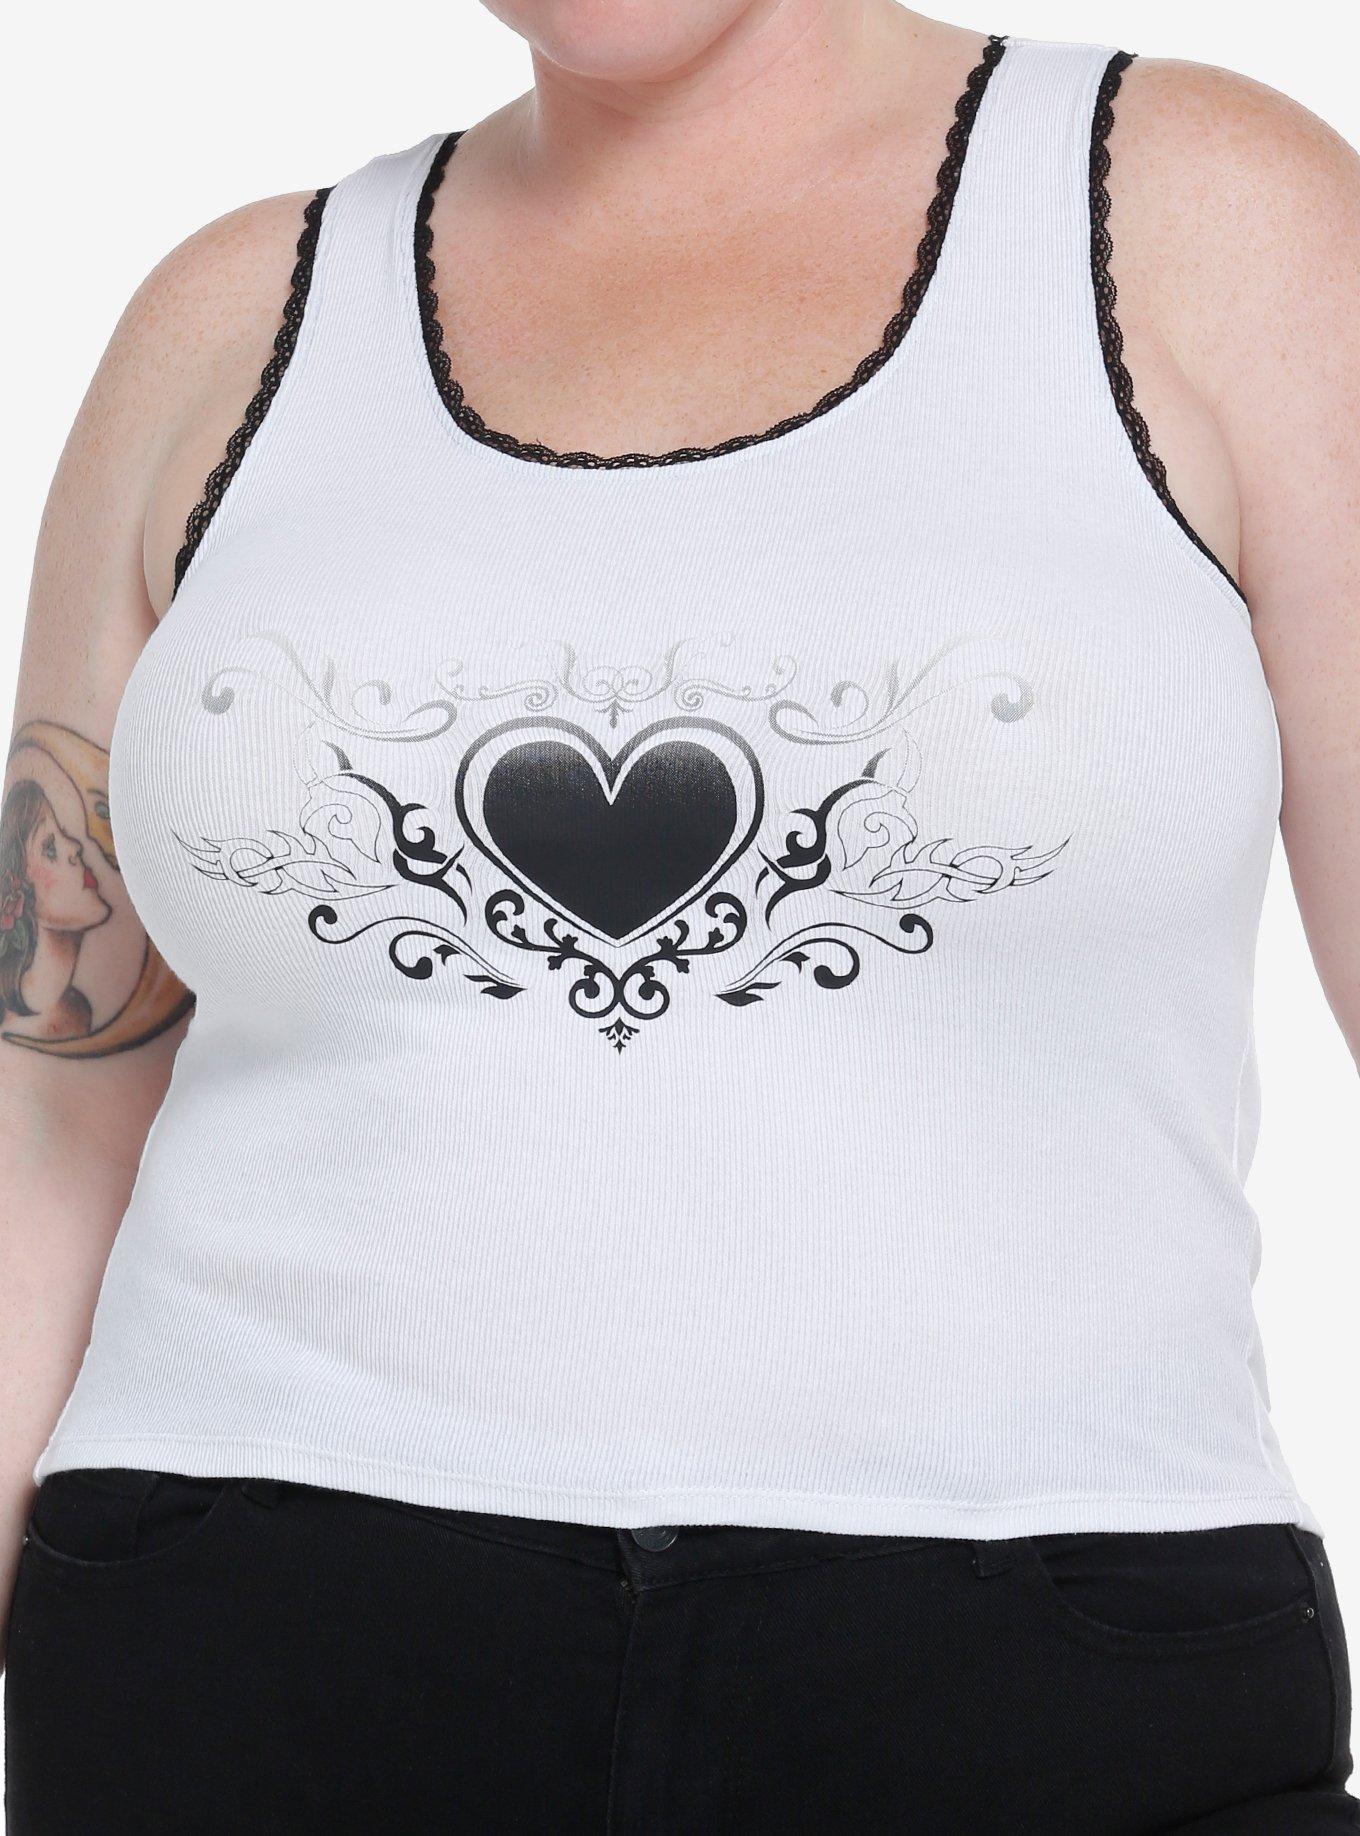 Thorn & Fable Heart Lace Girls Tank Top Plus Size, WHITE, hi-res